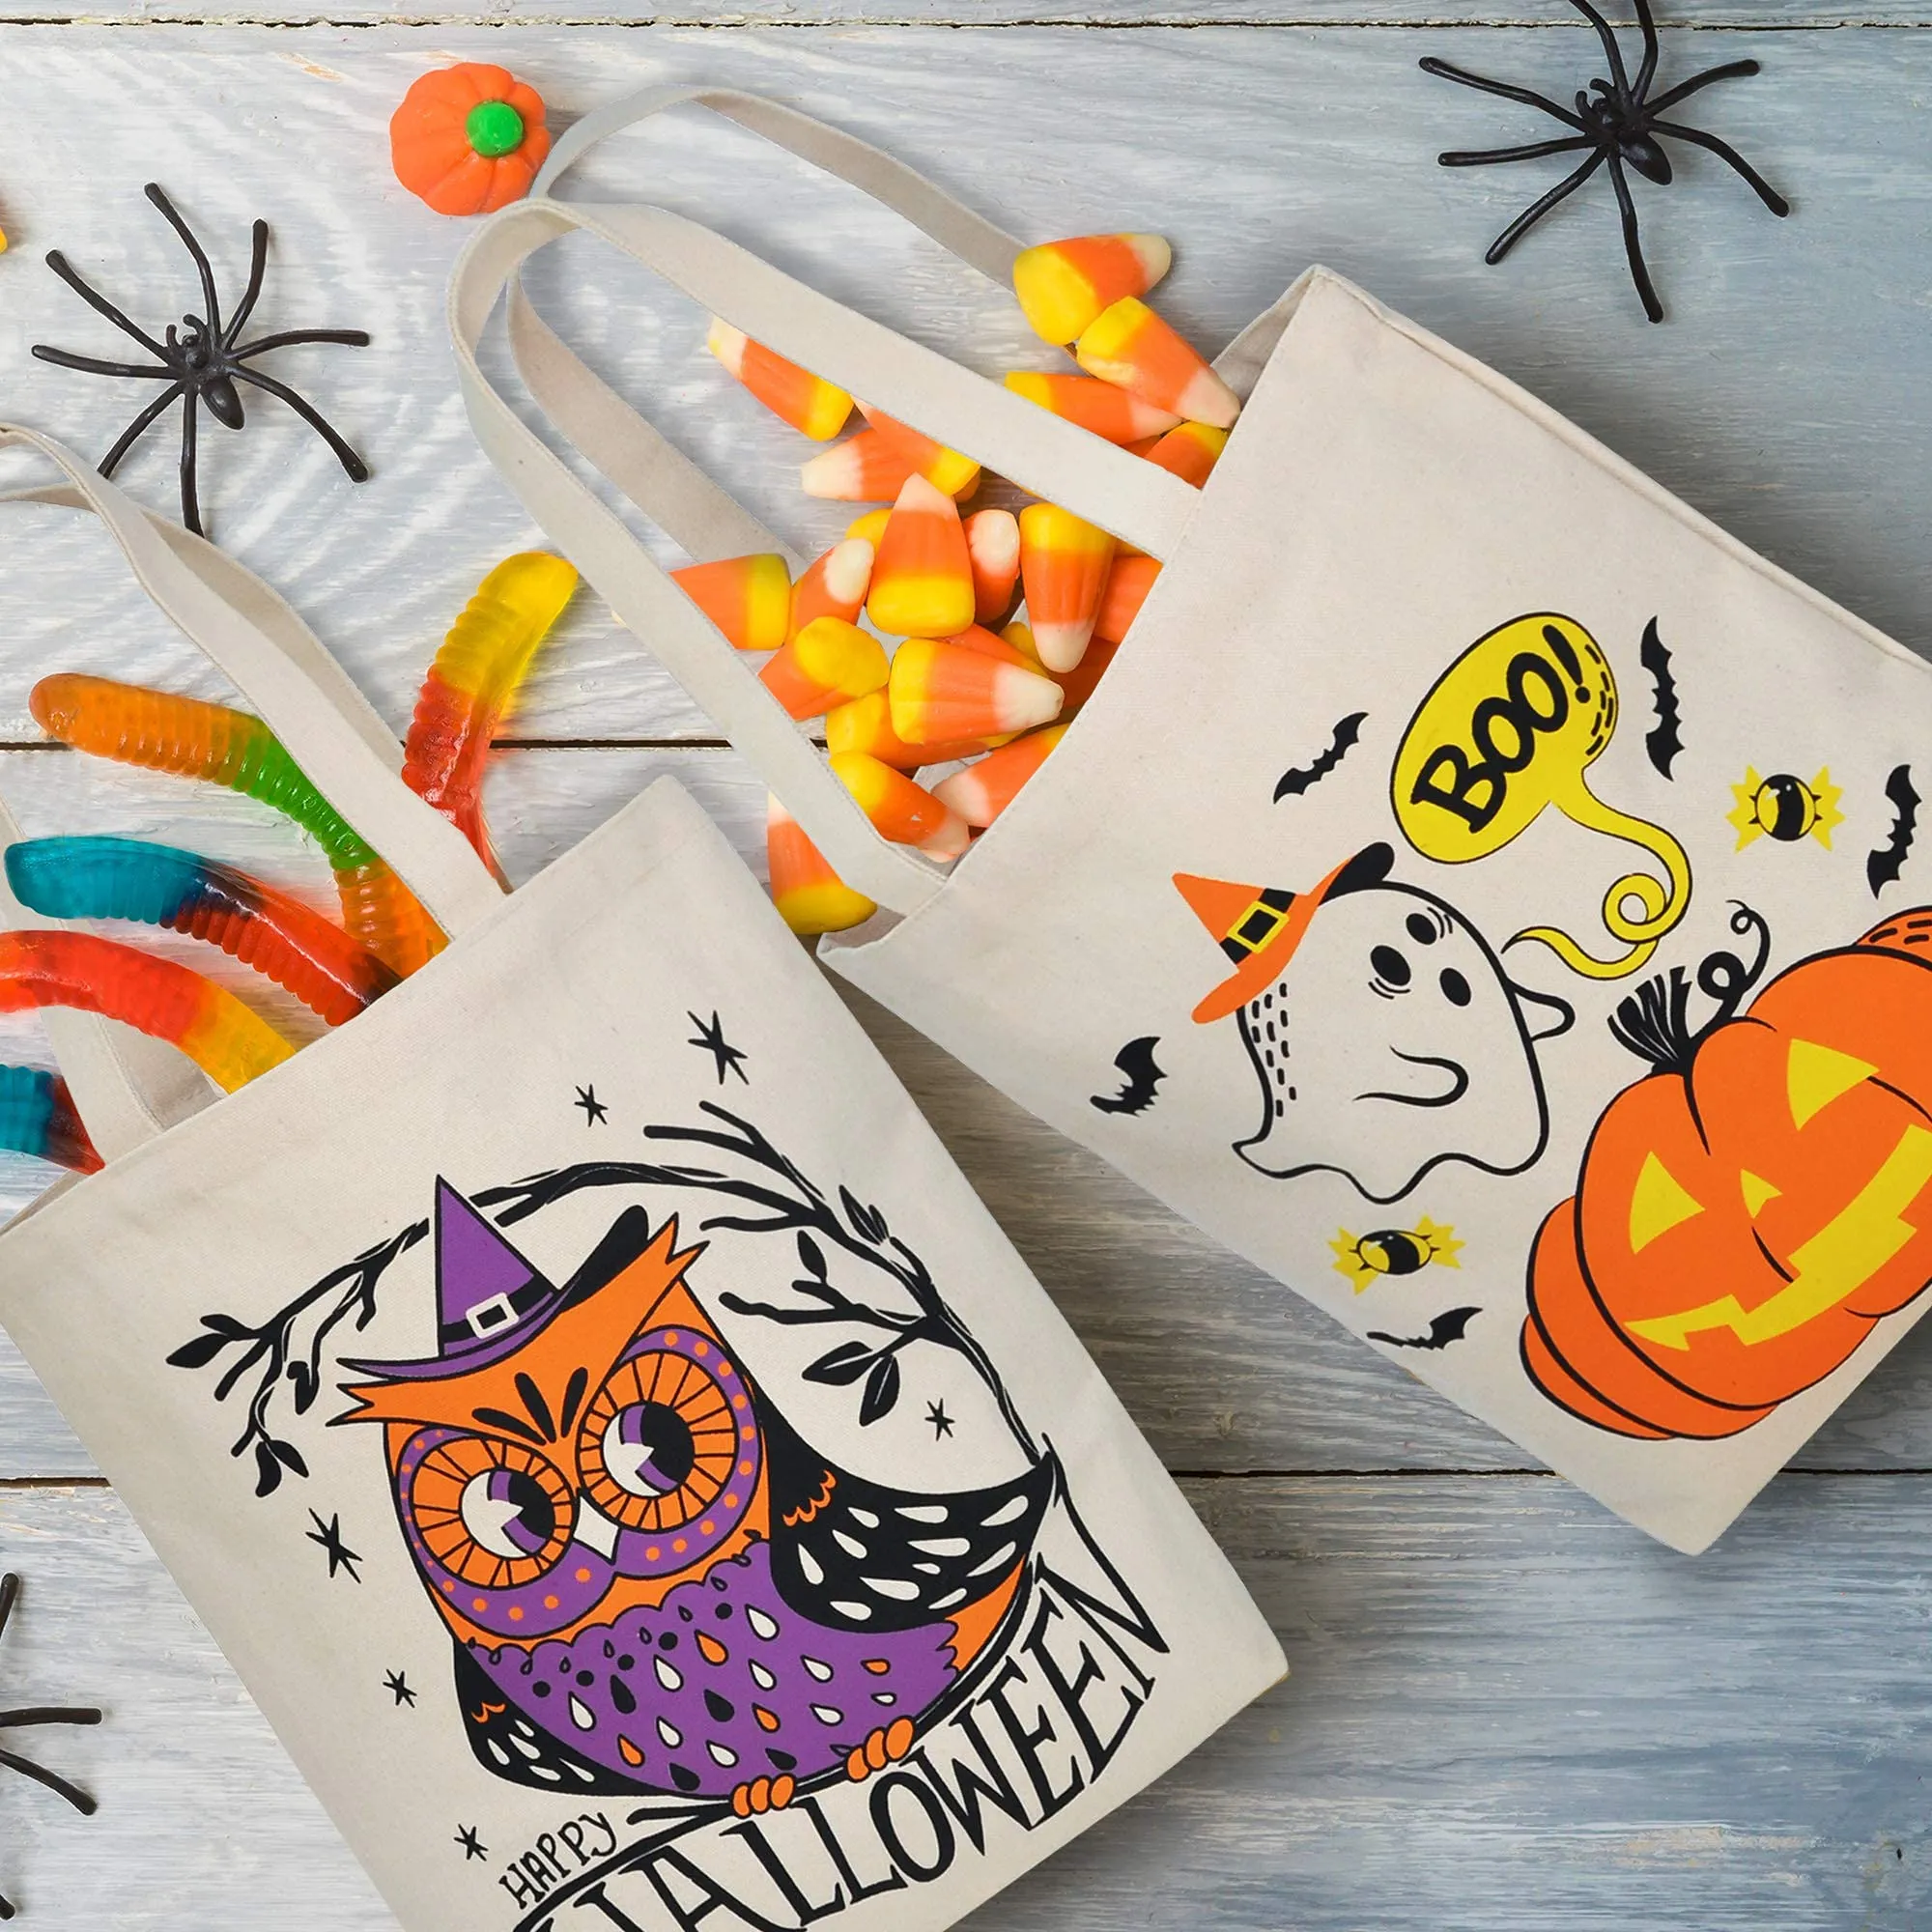 Happy Halloween, Custom Kids, Personalized Canvas Tote Bag, Halloween Bags  for Kids